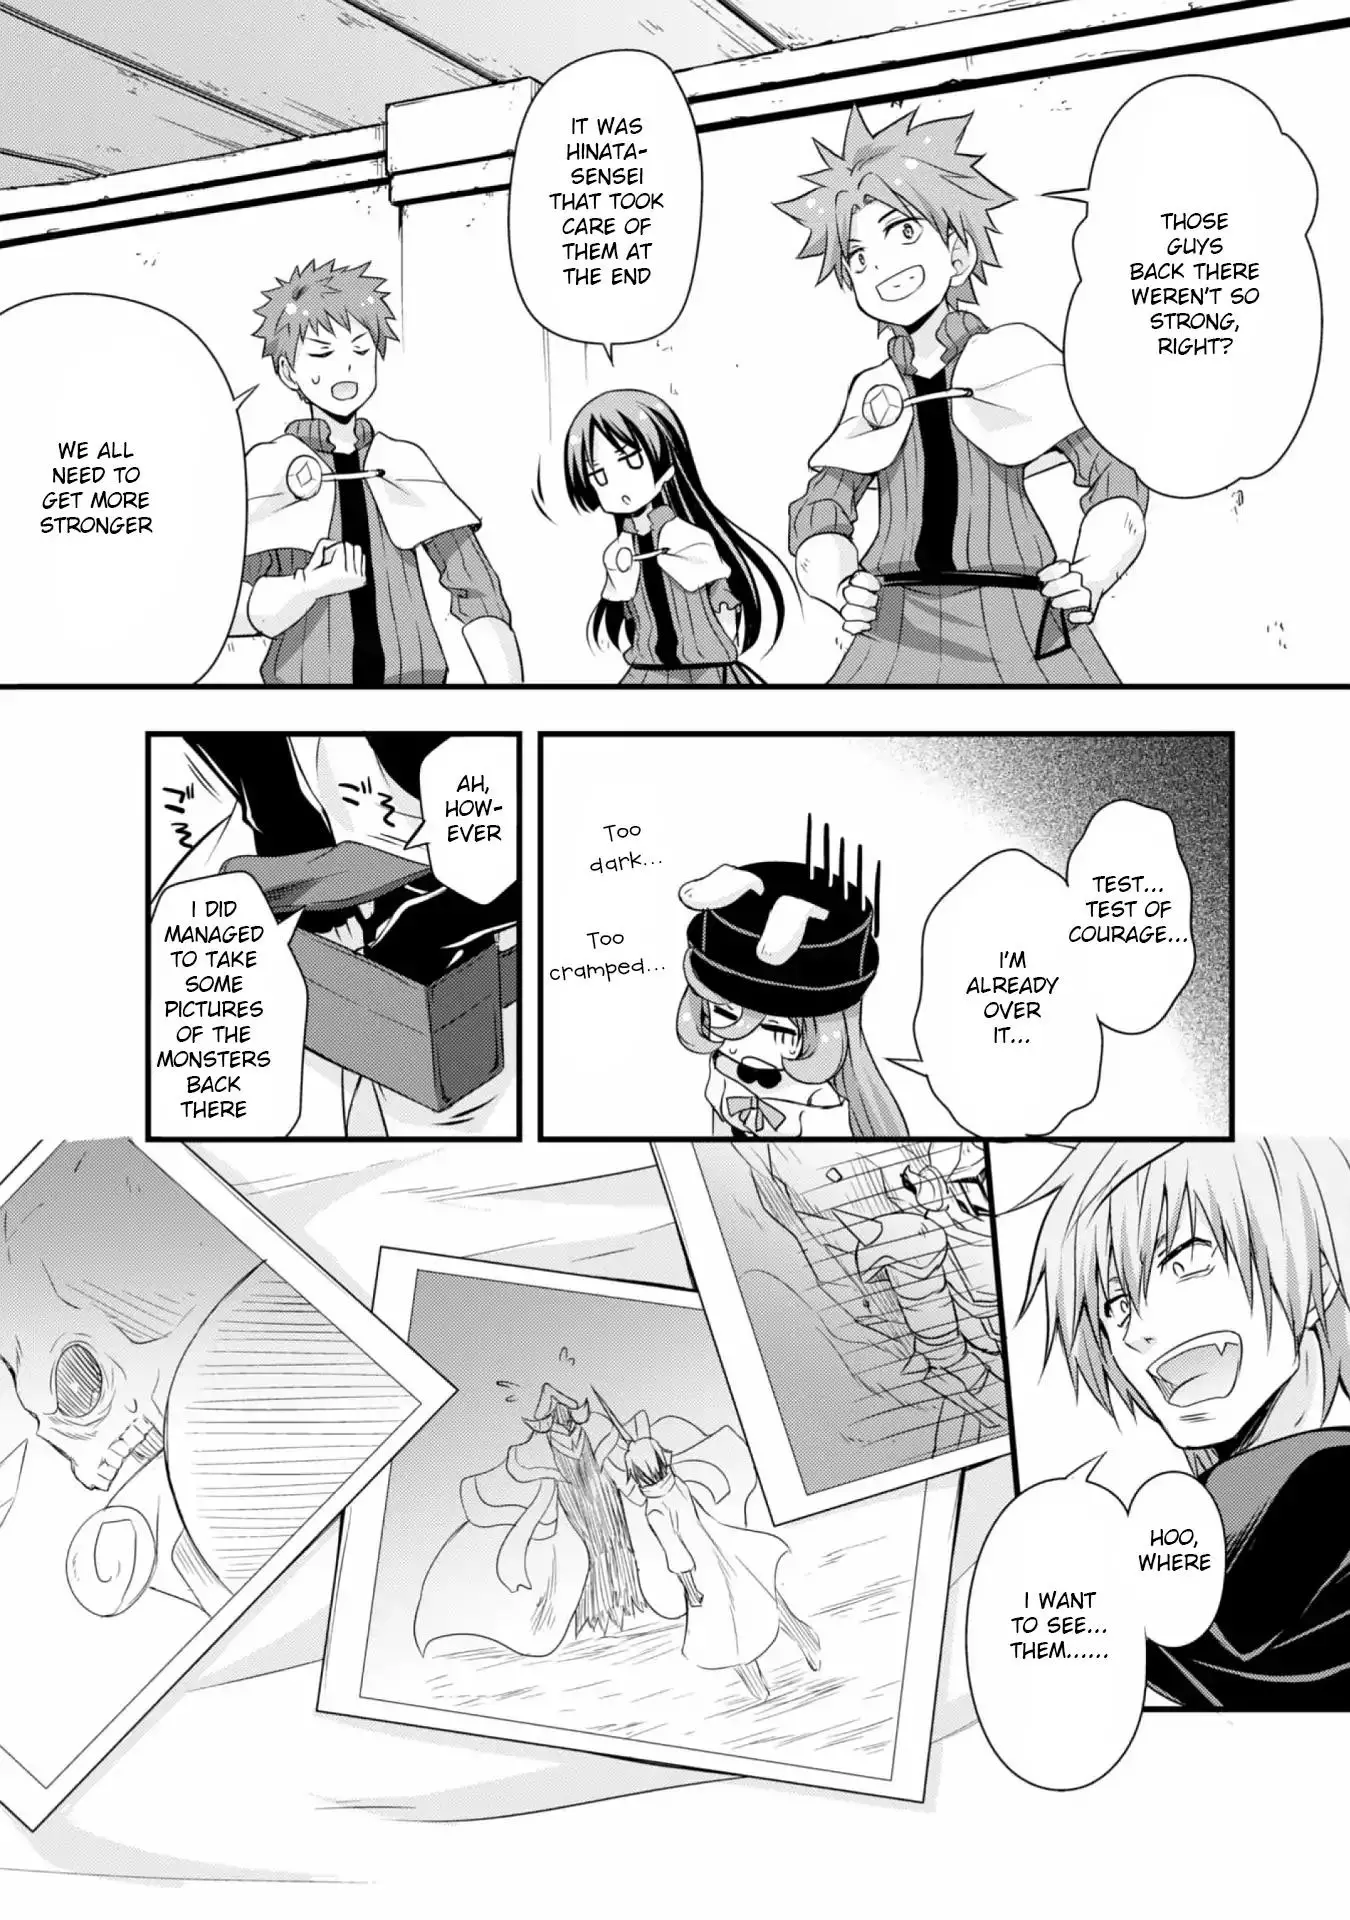 Tensei Shitara Slime Datta Ken: The Ways of Strolling in the Demon Country - 15 page 26